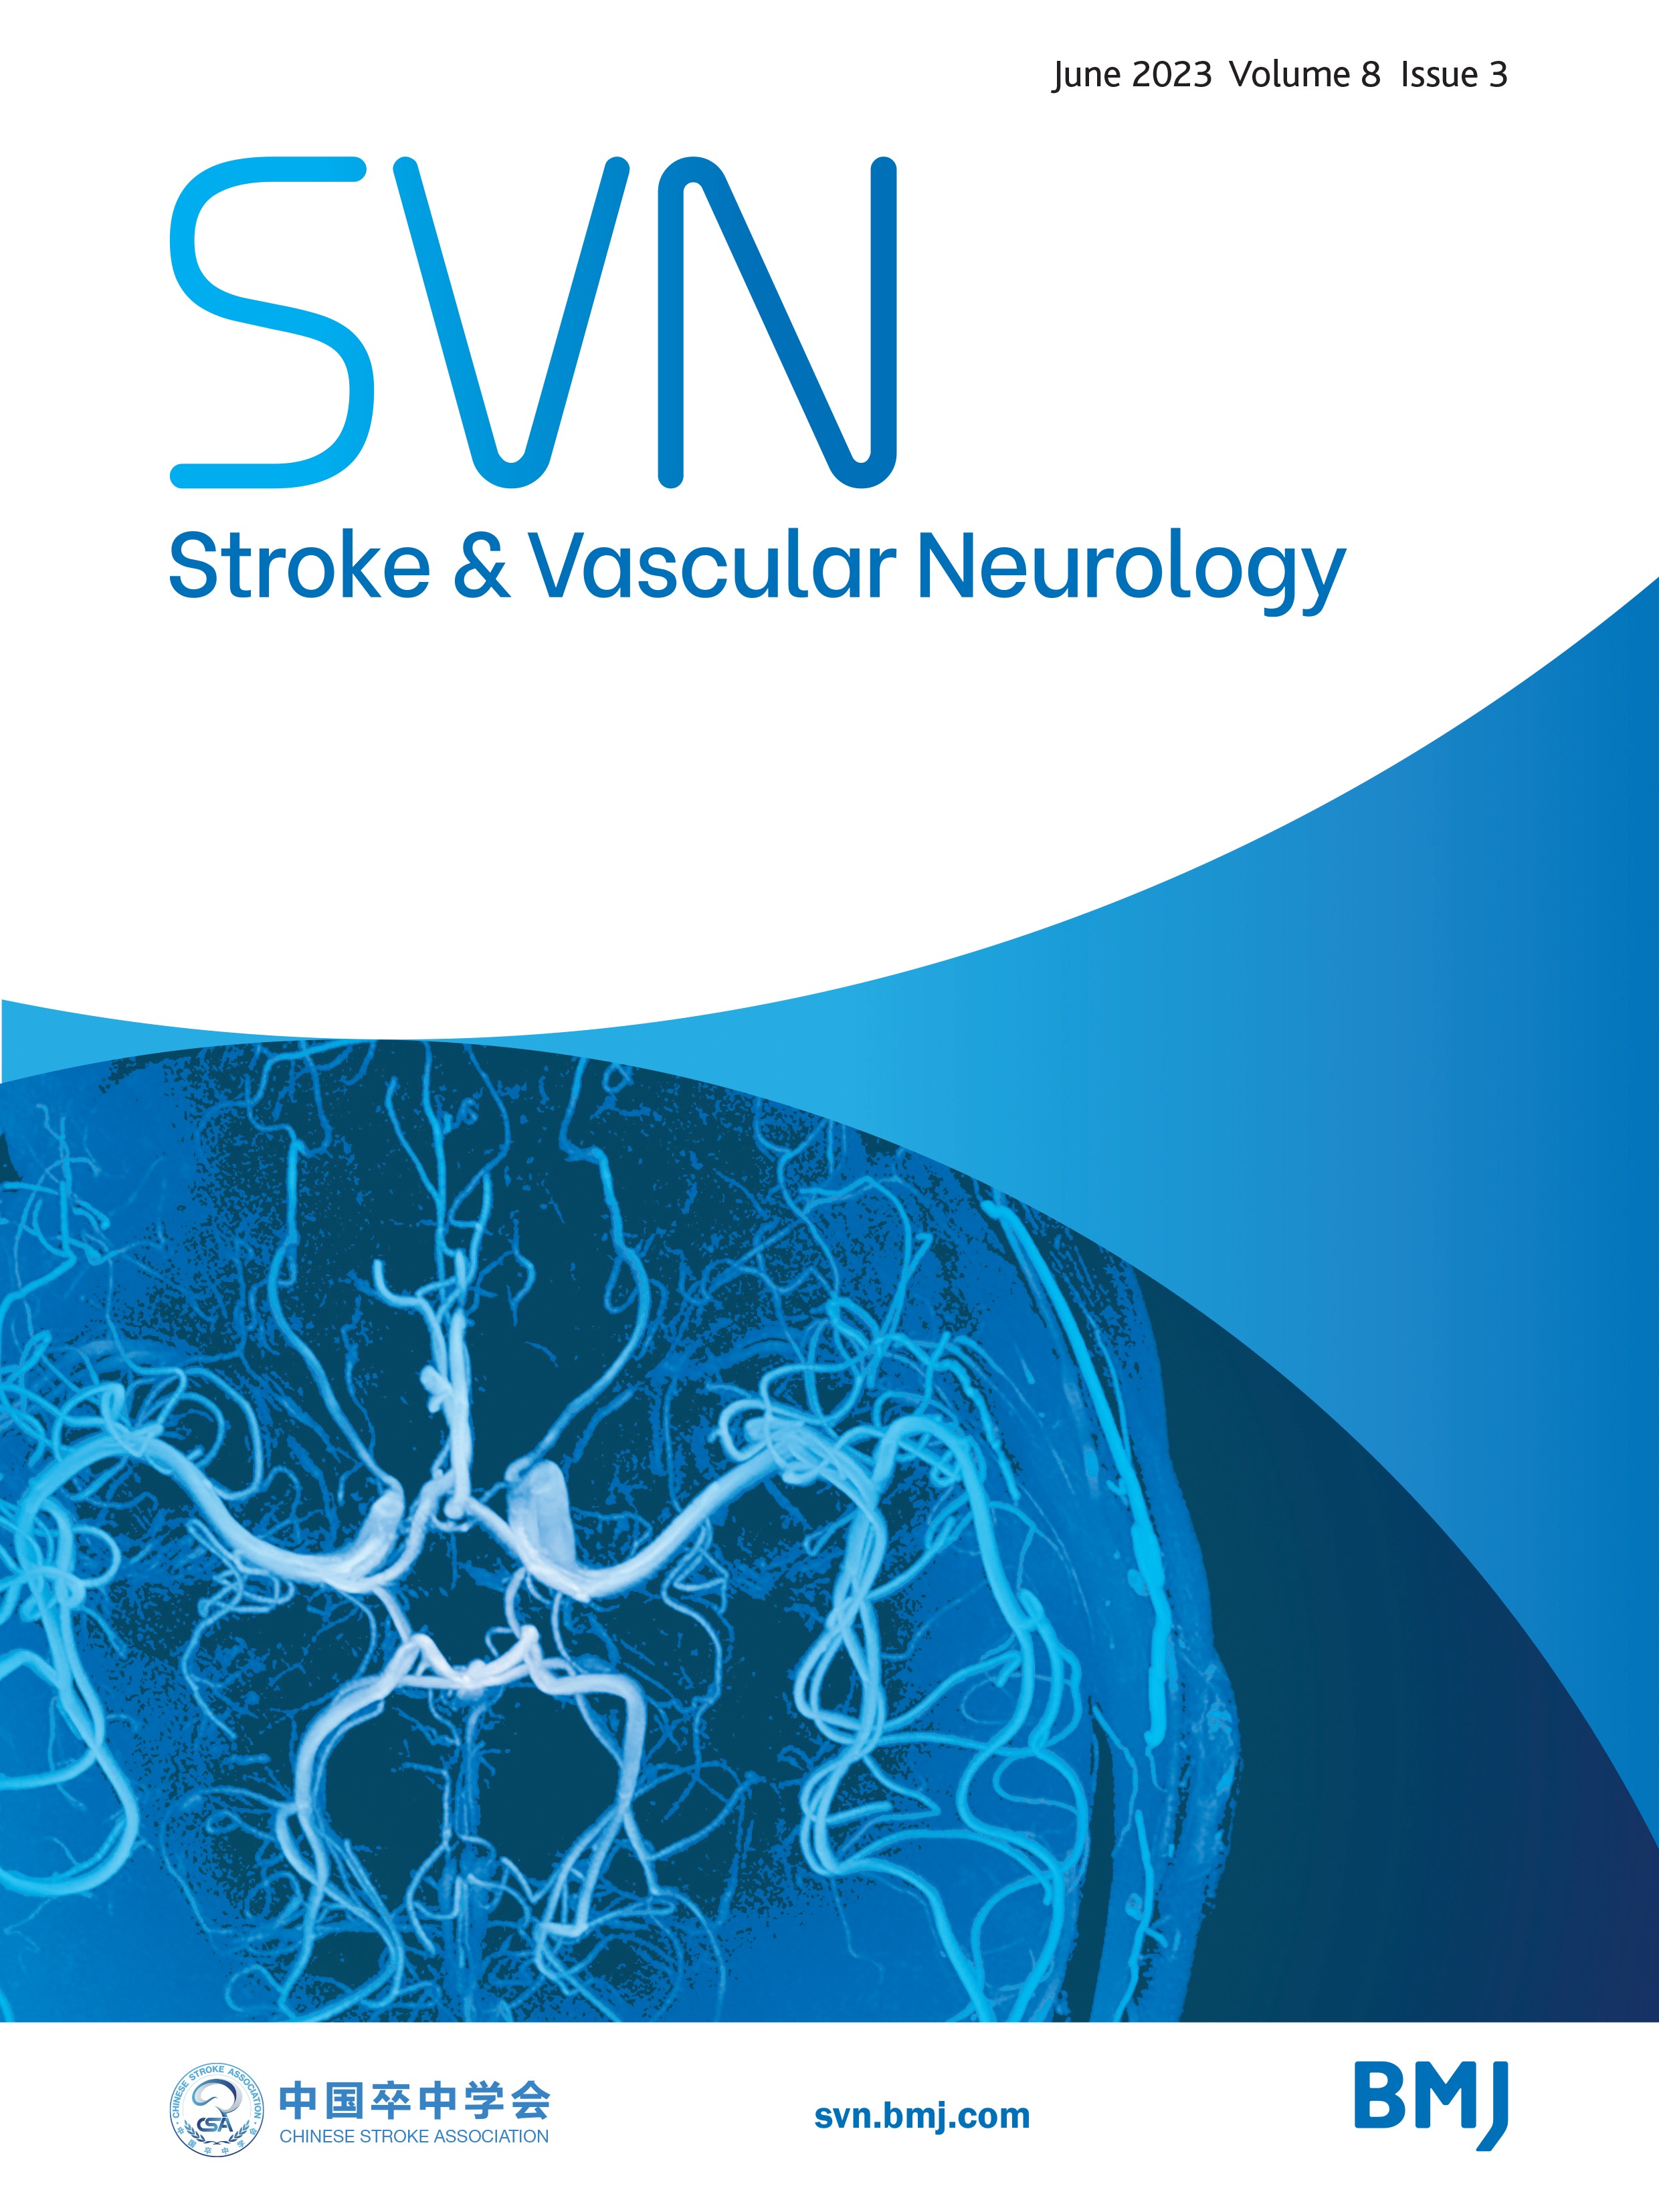 Venous thromboembolism among Medicare acute ischaemic stroke patients with and without COVID-19